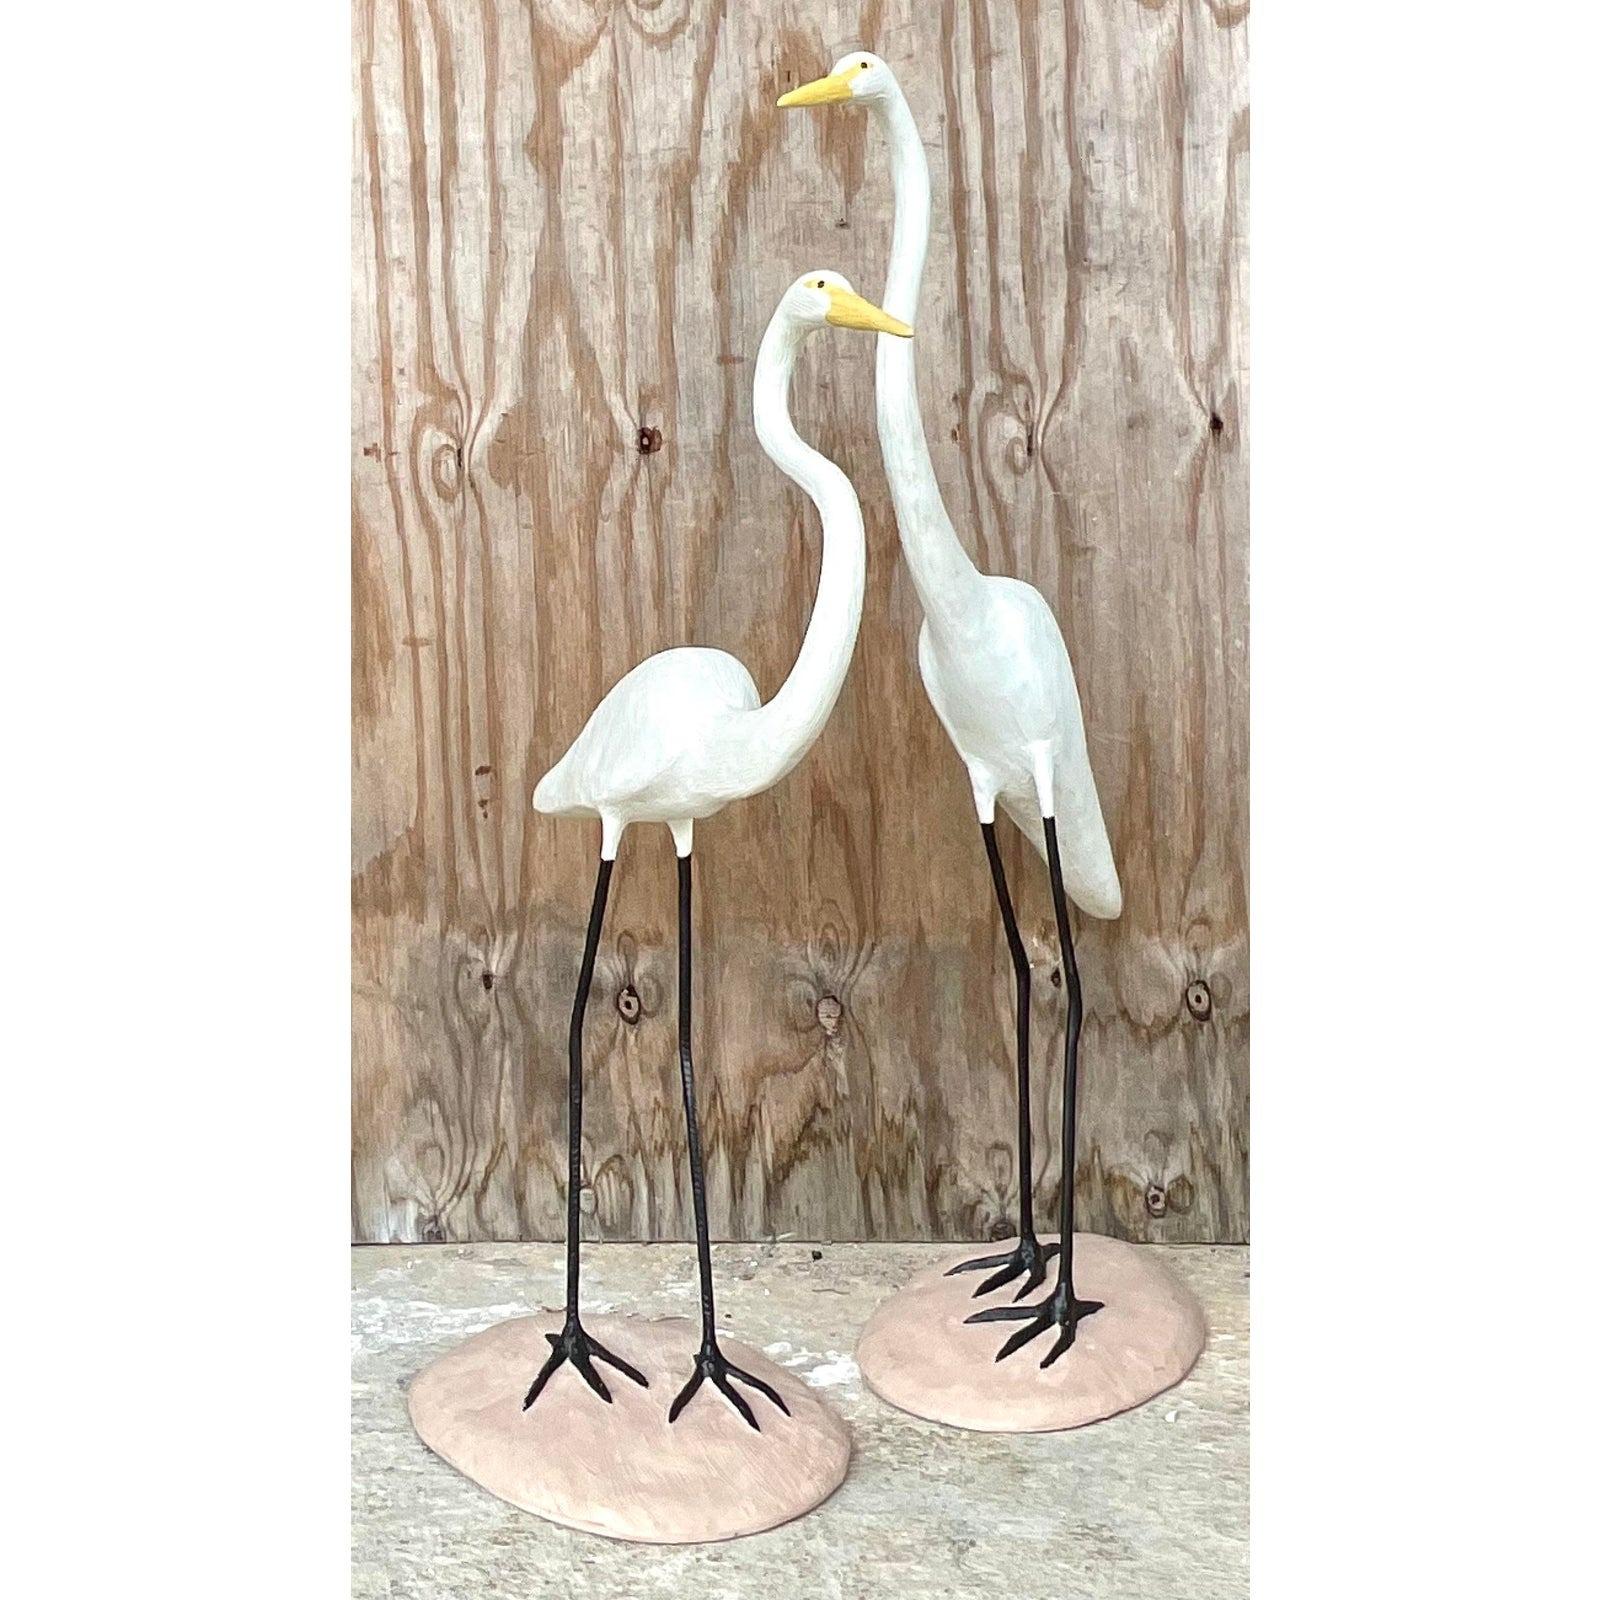 Vintage Boho Concrete Cranes - a Pair In Good Condition For Sale In west palm beach, FL